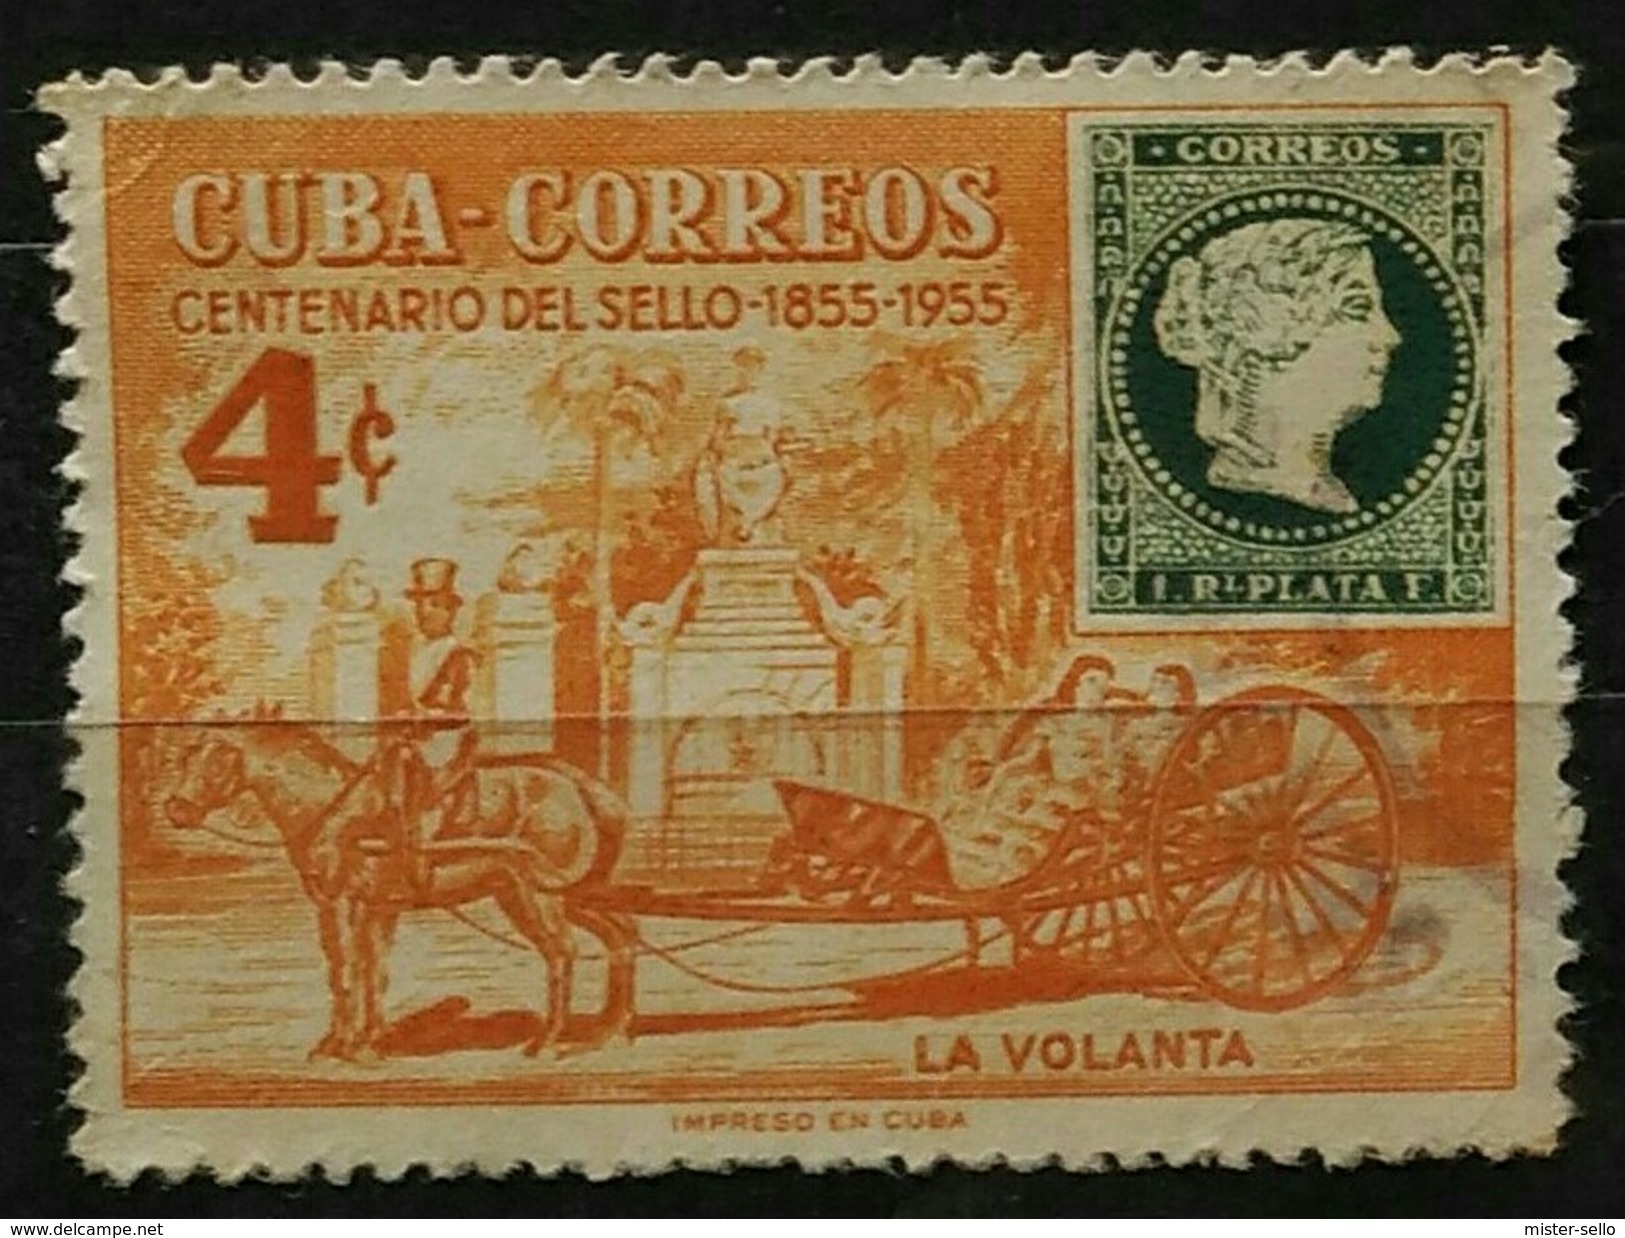 CU BA 1955 The 100th Anniversary Of The First Cuban Postage Stamps. USADO - USED. - Usati